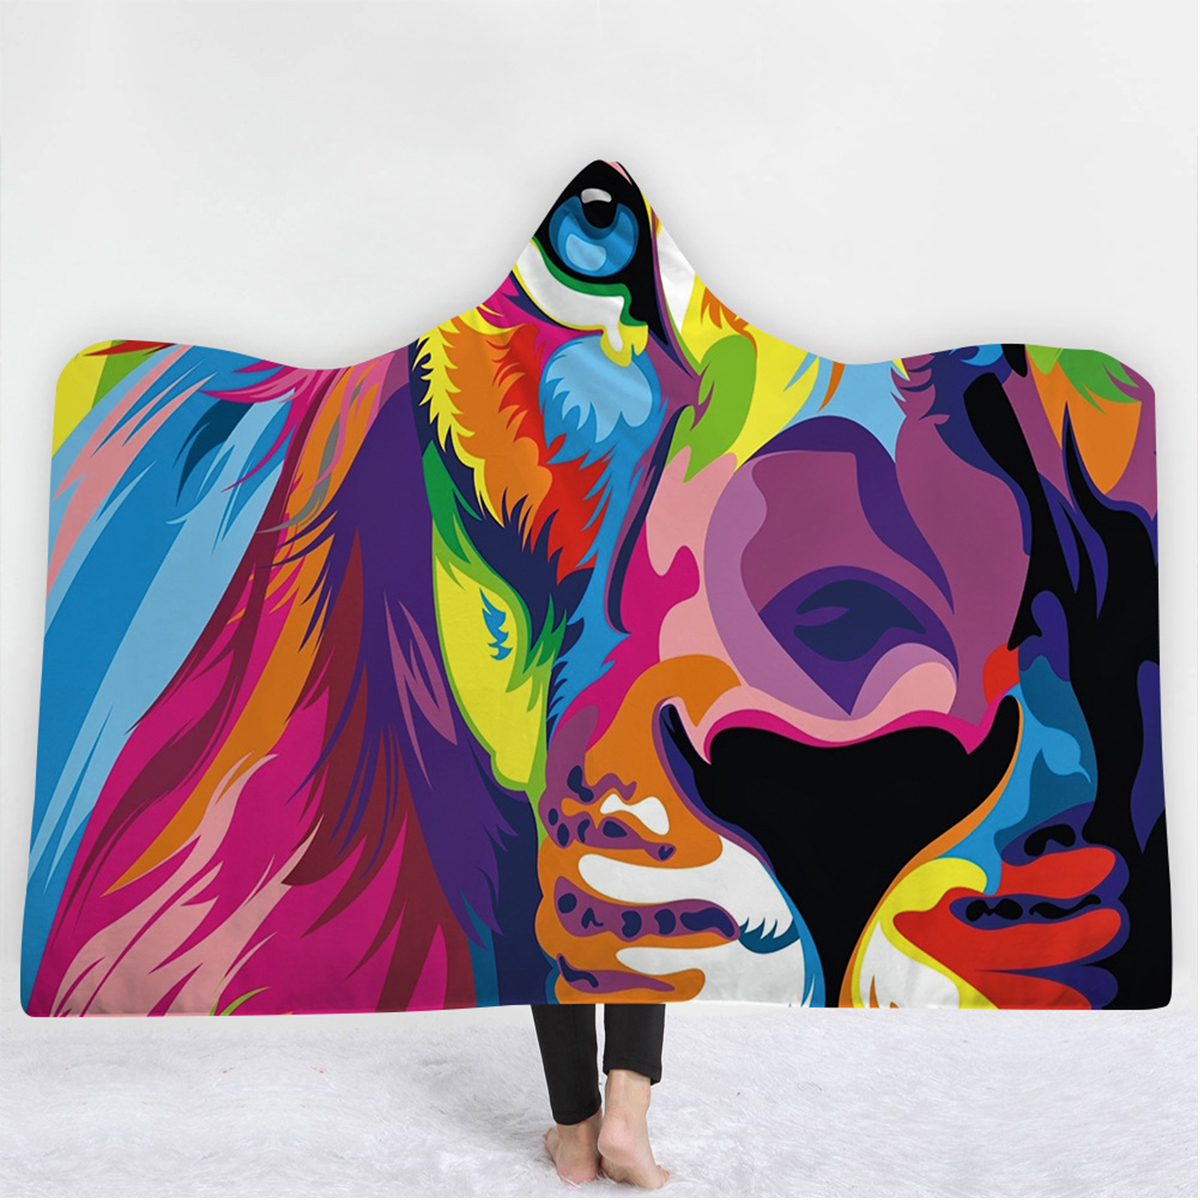 Hooded-Blankets-Lion-Colorful-Printed-Warm-Wearable-Plush-Mat-Thick-Nap-Soft-Blanke-1400297-3